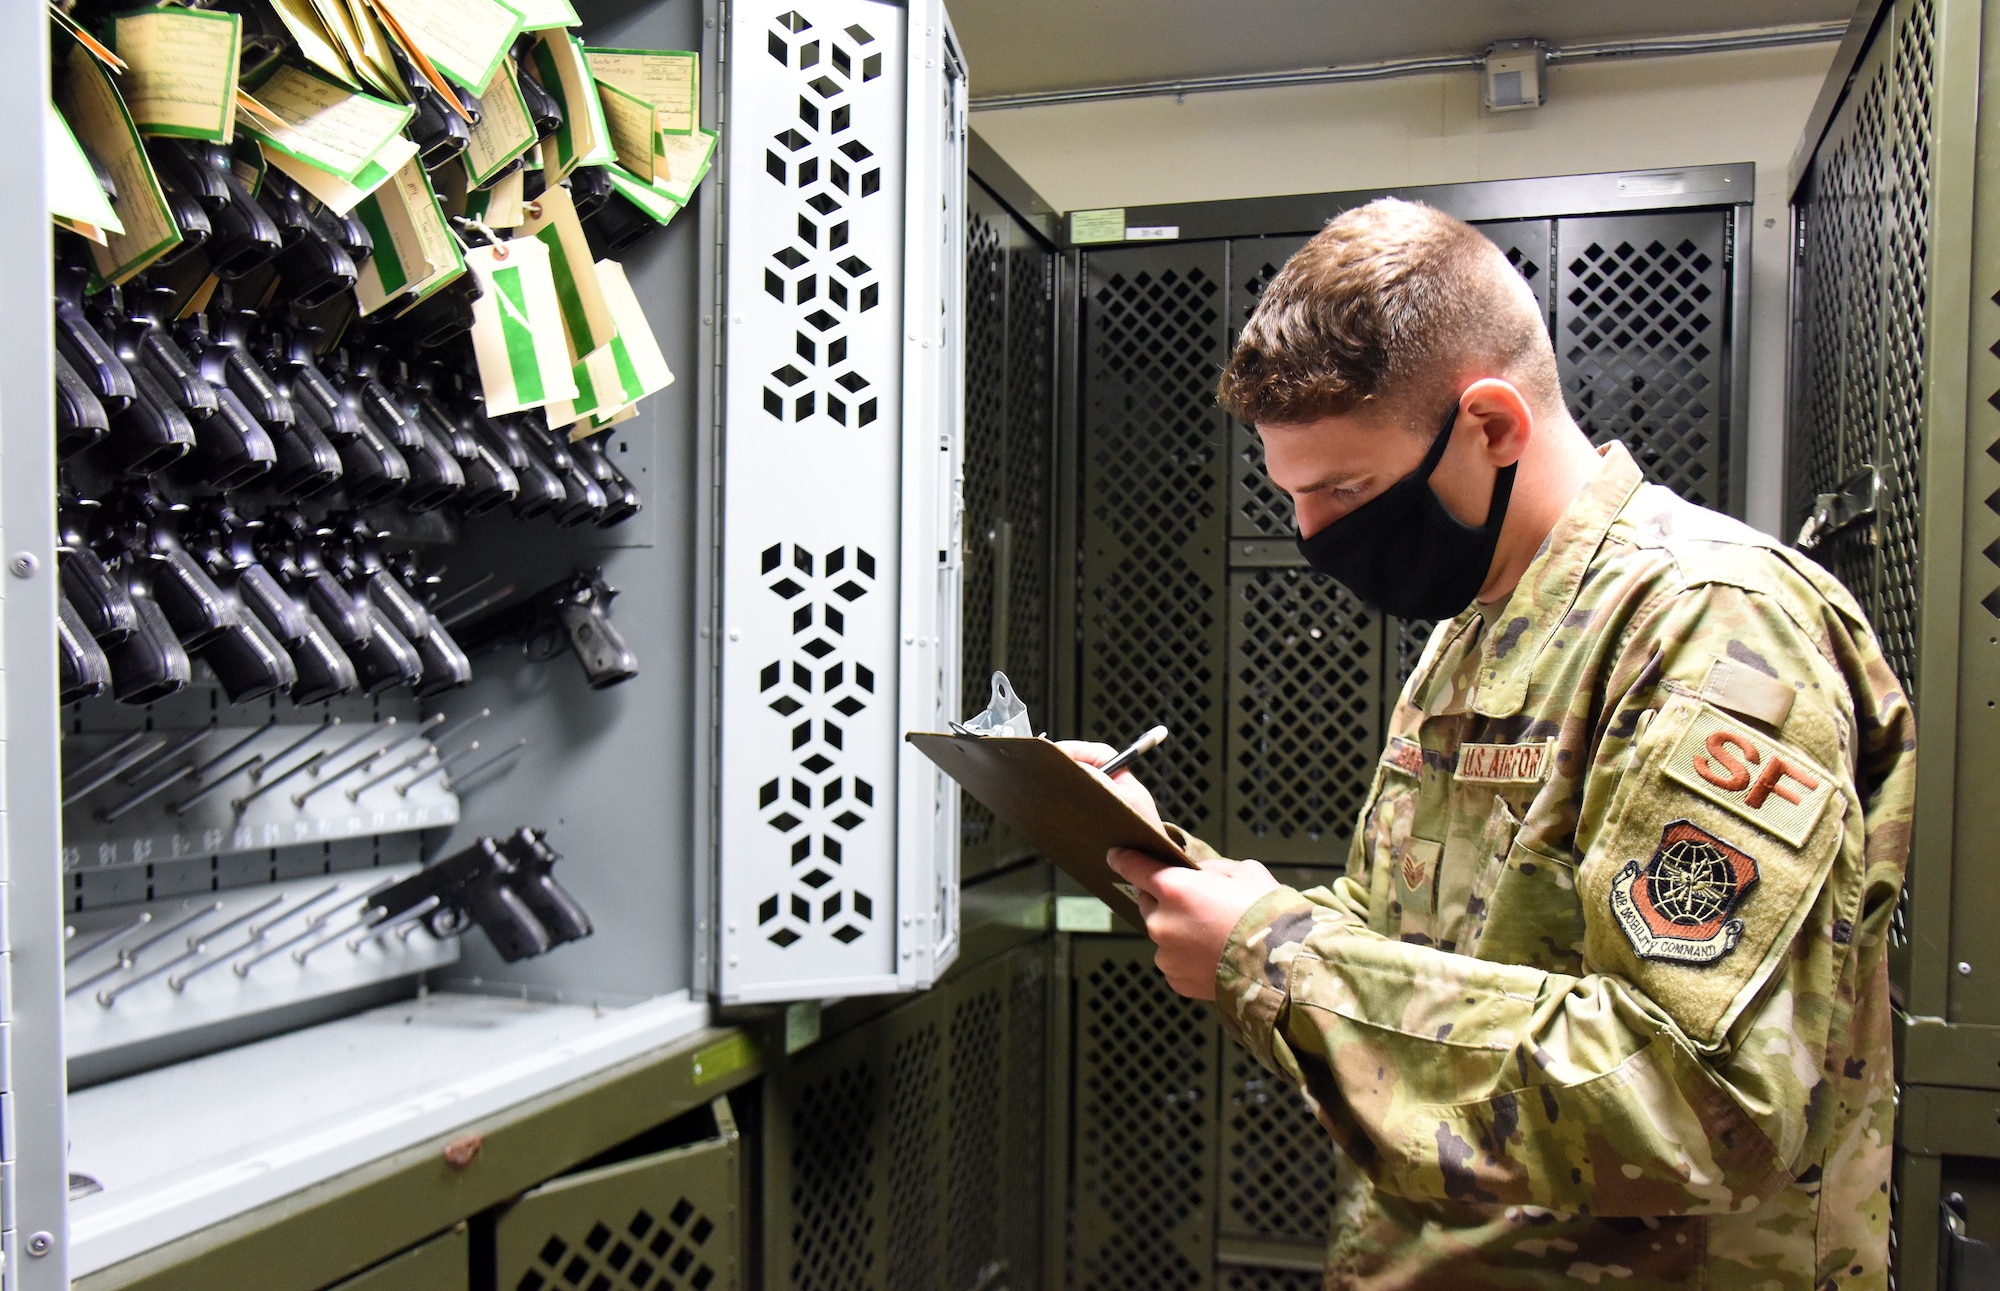 U.S. Air Force Staff Sgt. Andrew Barrows, 87th Security Forces Squadron combat arms instructor, performs inventory checks in the armory room, Nov. 6, 2020, on Joint Base McGuire-Dix-Lakehurst, N.J. Barrows performs inventory checks on a daily basis to ensure that all weapons and ammunition are accounted for, while maintaining smooth operations. (U.S. Air Force photo by Daniel Barney)